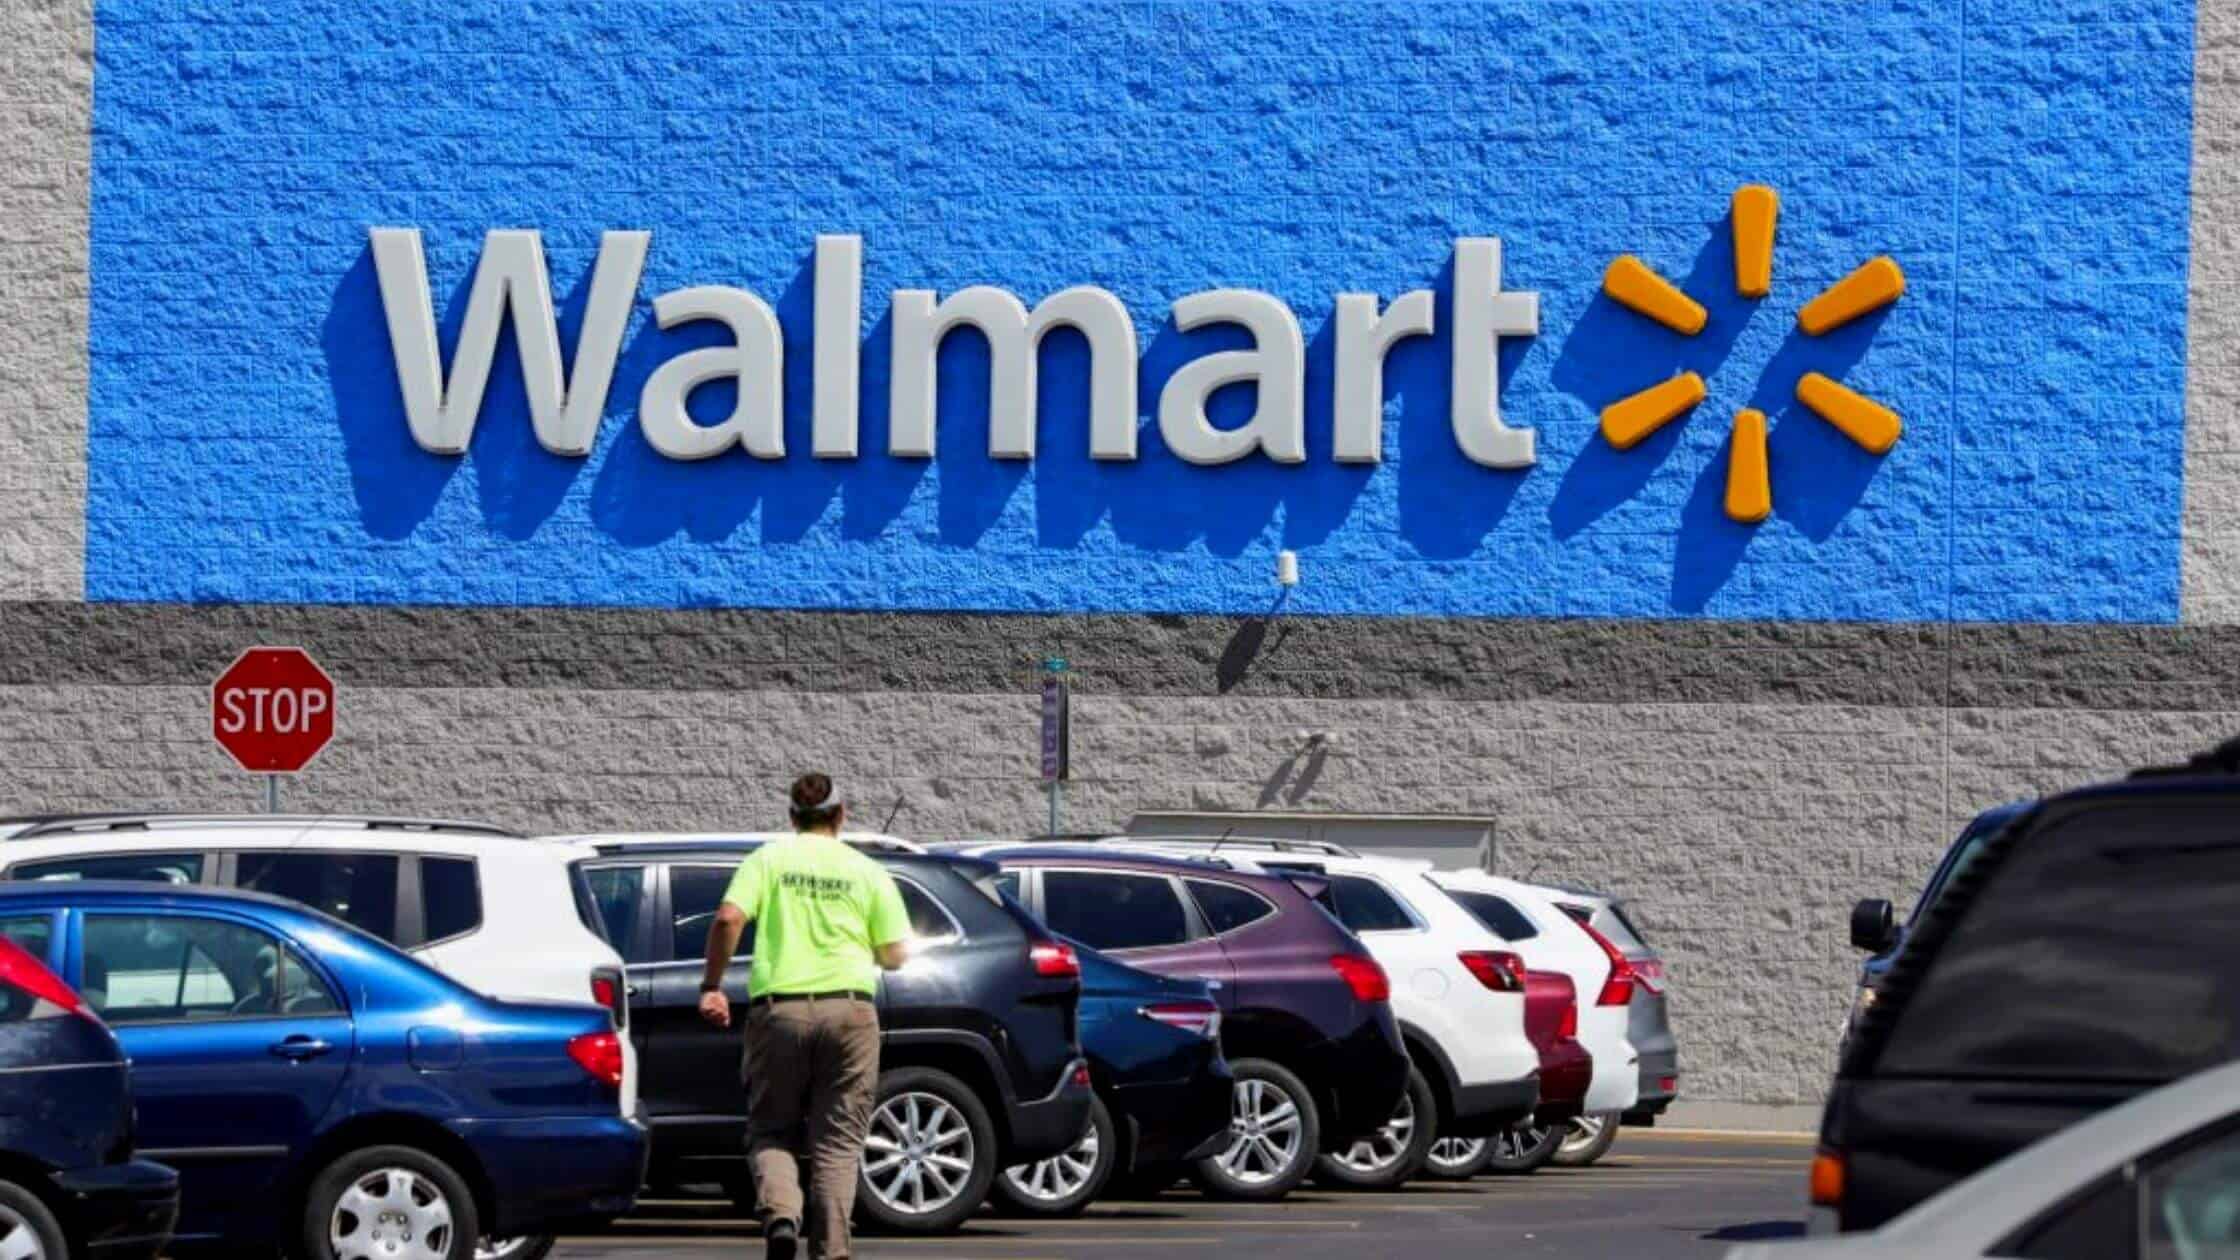 Walmart Has Decided To Make A $3.1 Billion Payment For Selling Opioids At Its Pharmacies